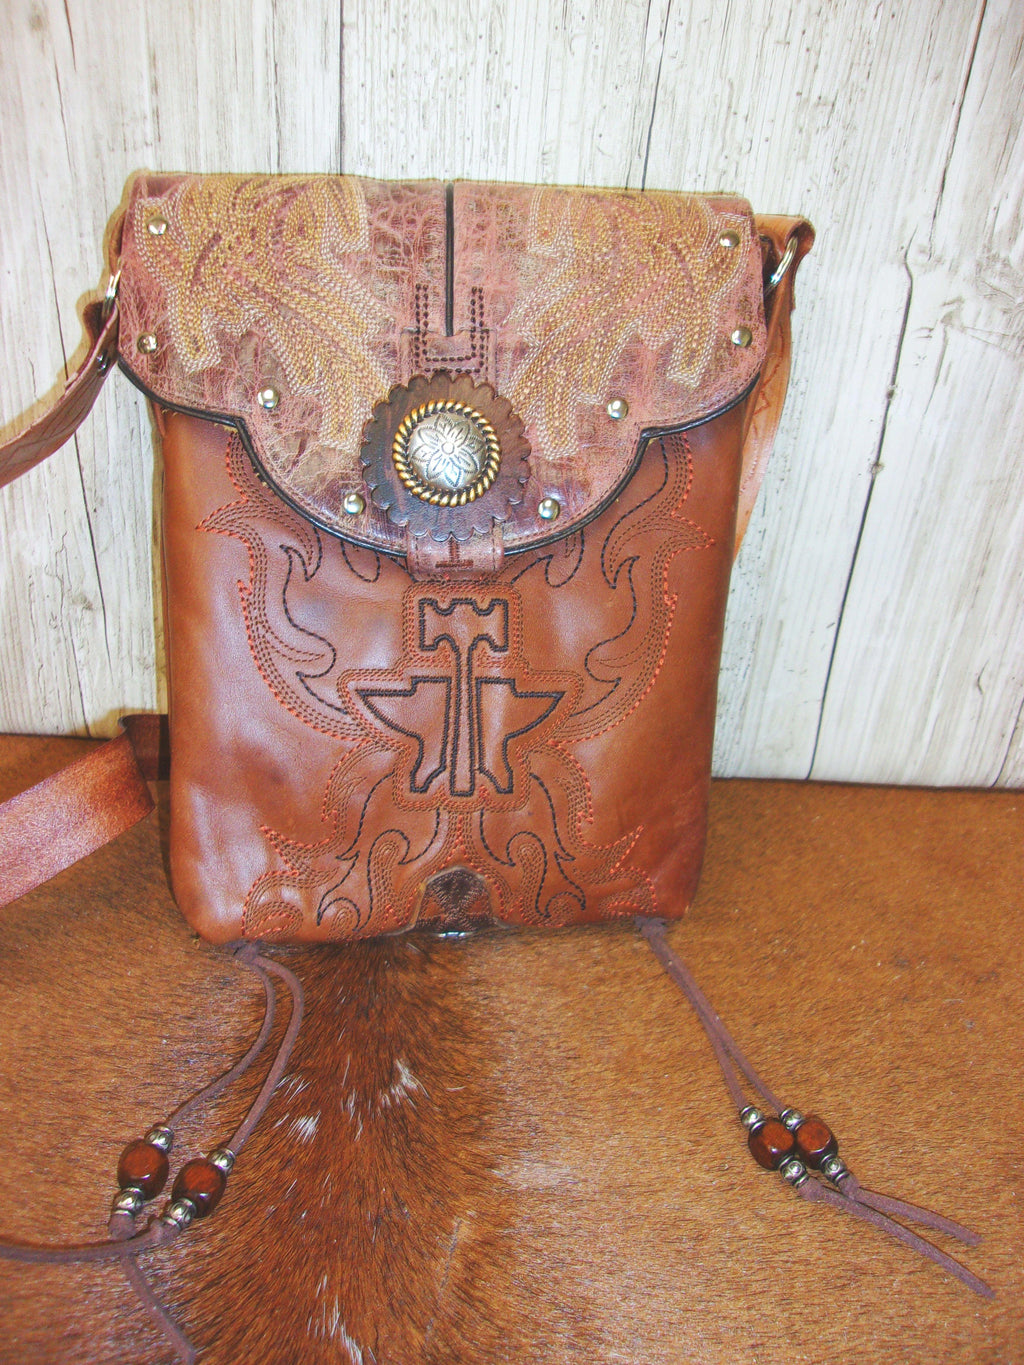 Cowboy Boot Concealed Carry Purse - Crossbody Conceal Carry Purse CB152 cowboy boot purses, western fringe purse, handmade leather purses, boot purse, handmade western purse, custom leather handbags Chris Thompson Bags